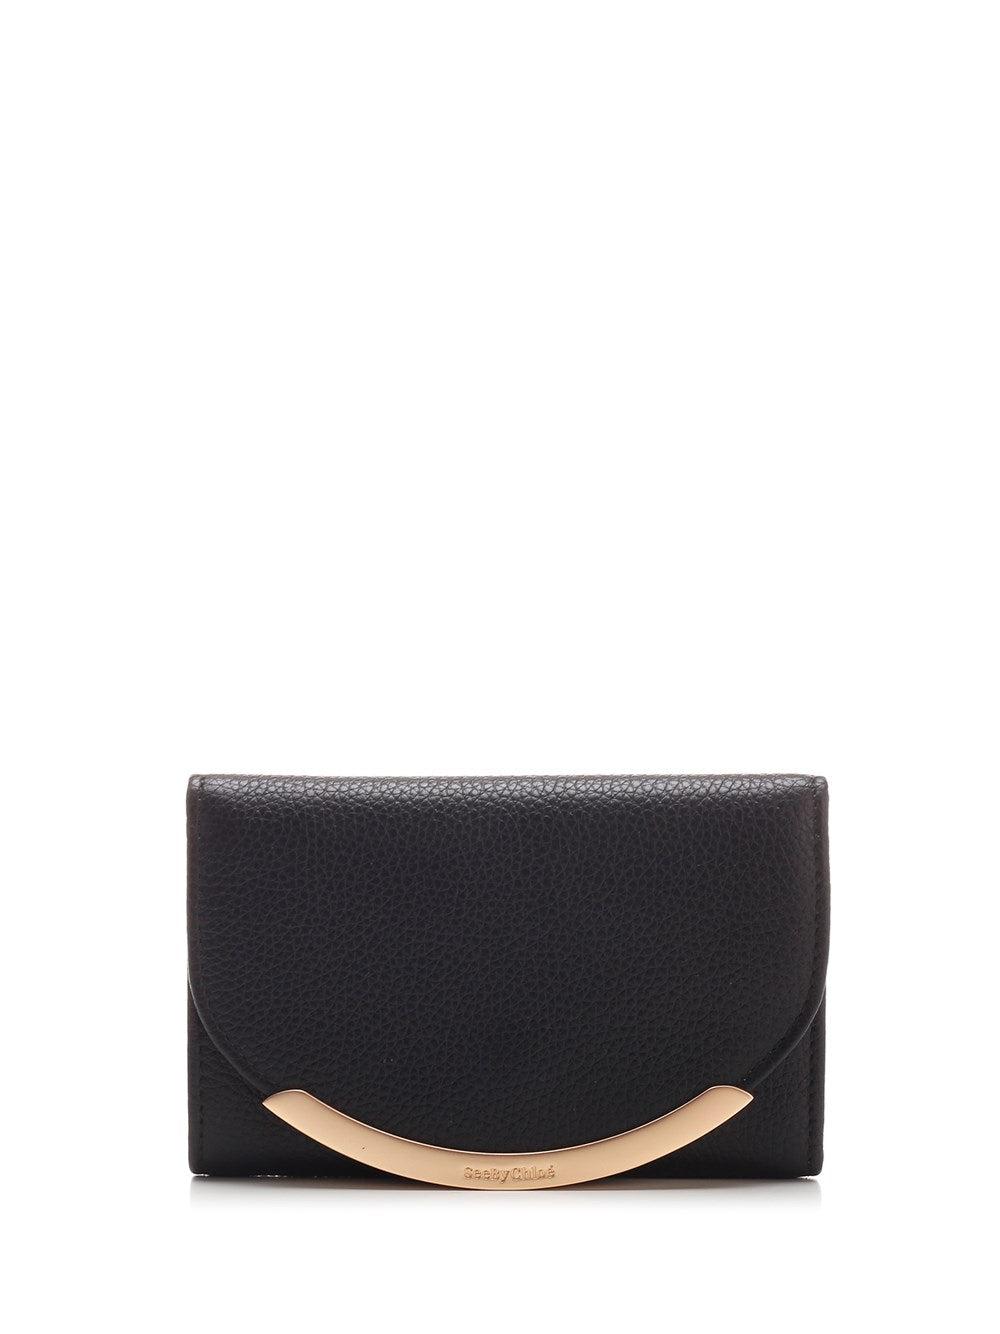 See by Chloé Lizzie Compact Flap Wallet